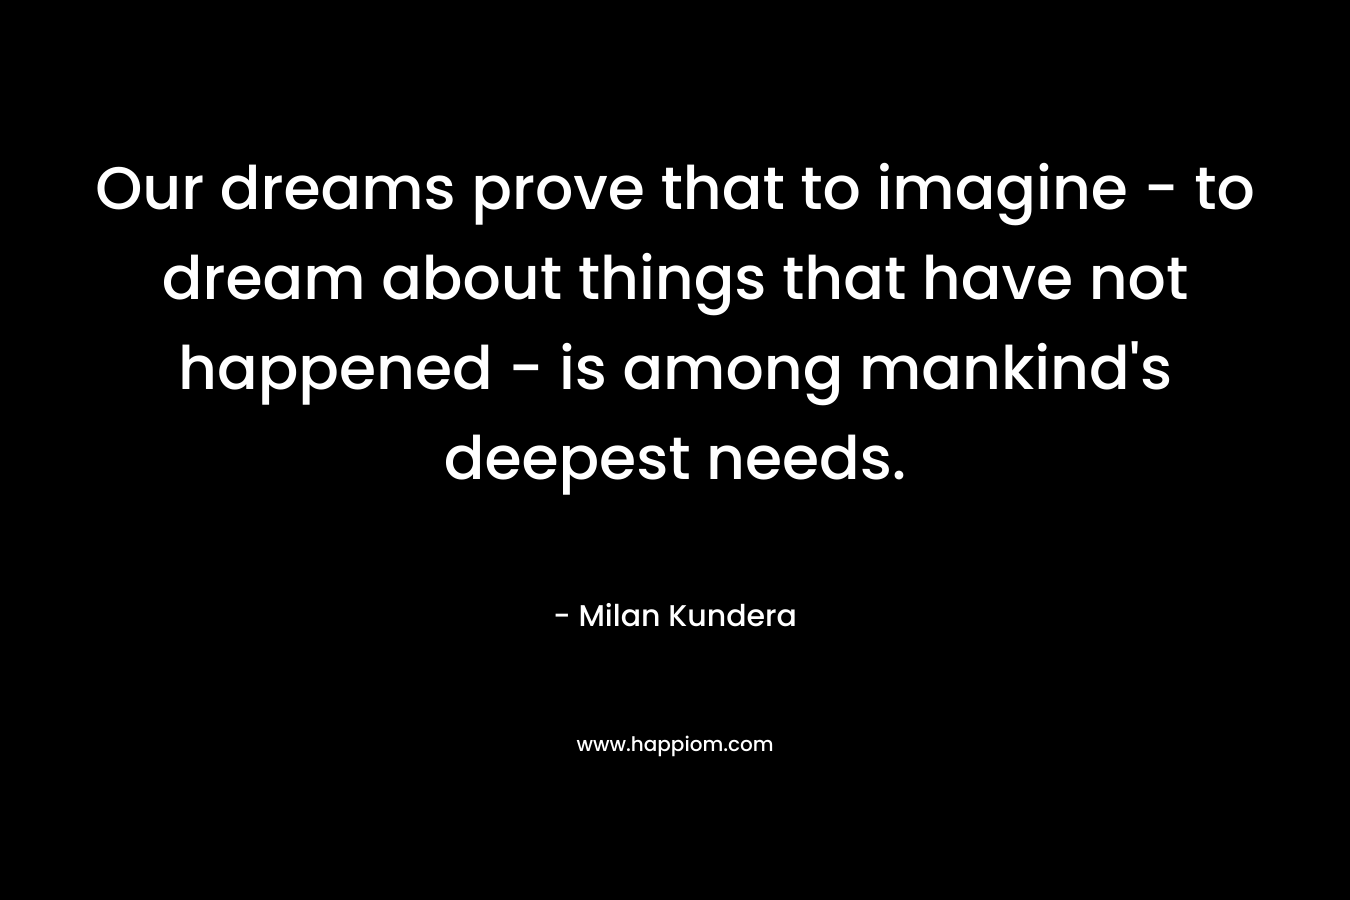 Our dreams prove that to imagine - to dream about things that have not happened - is among mankind's deepest needs.